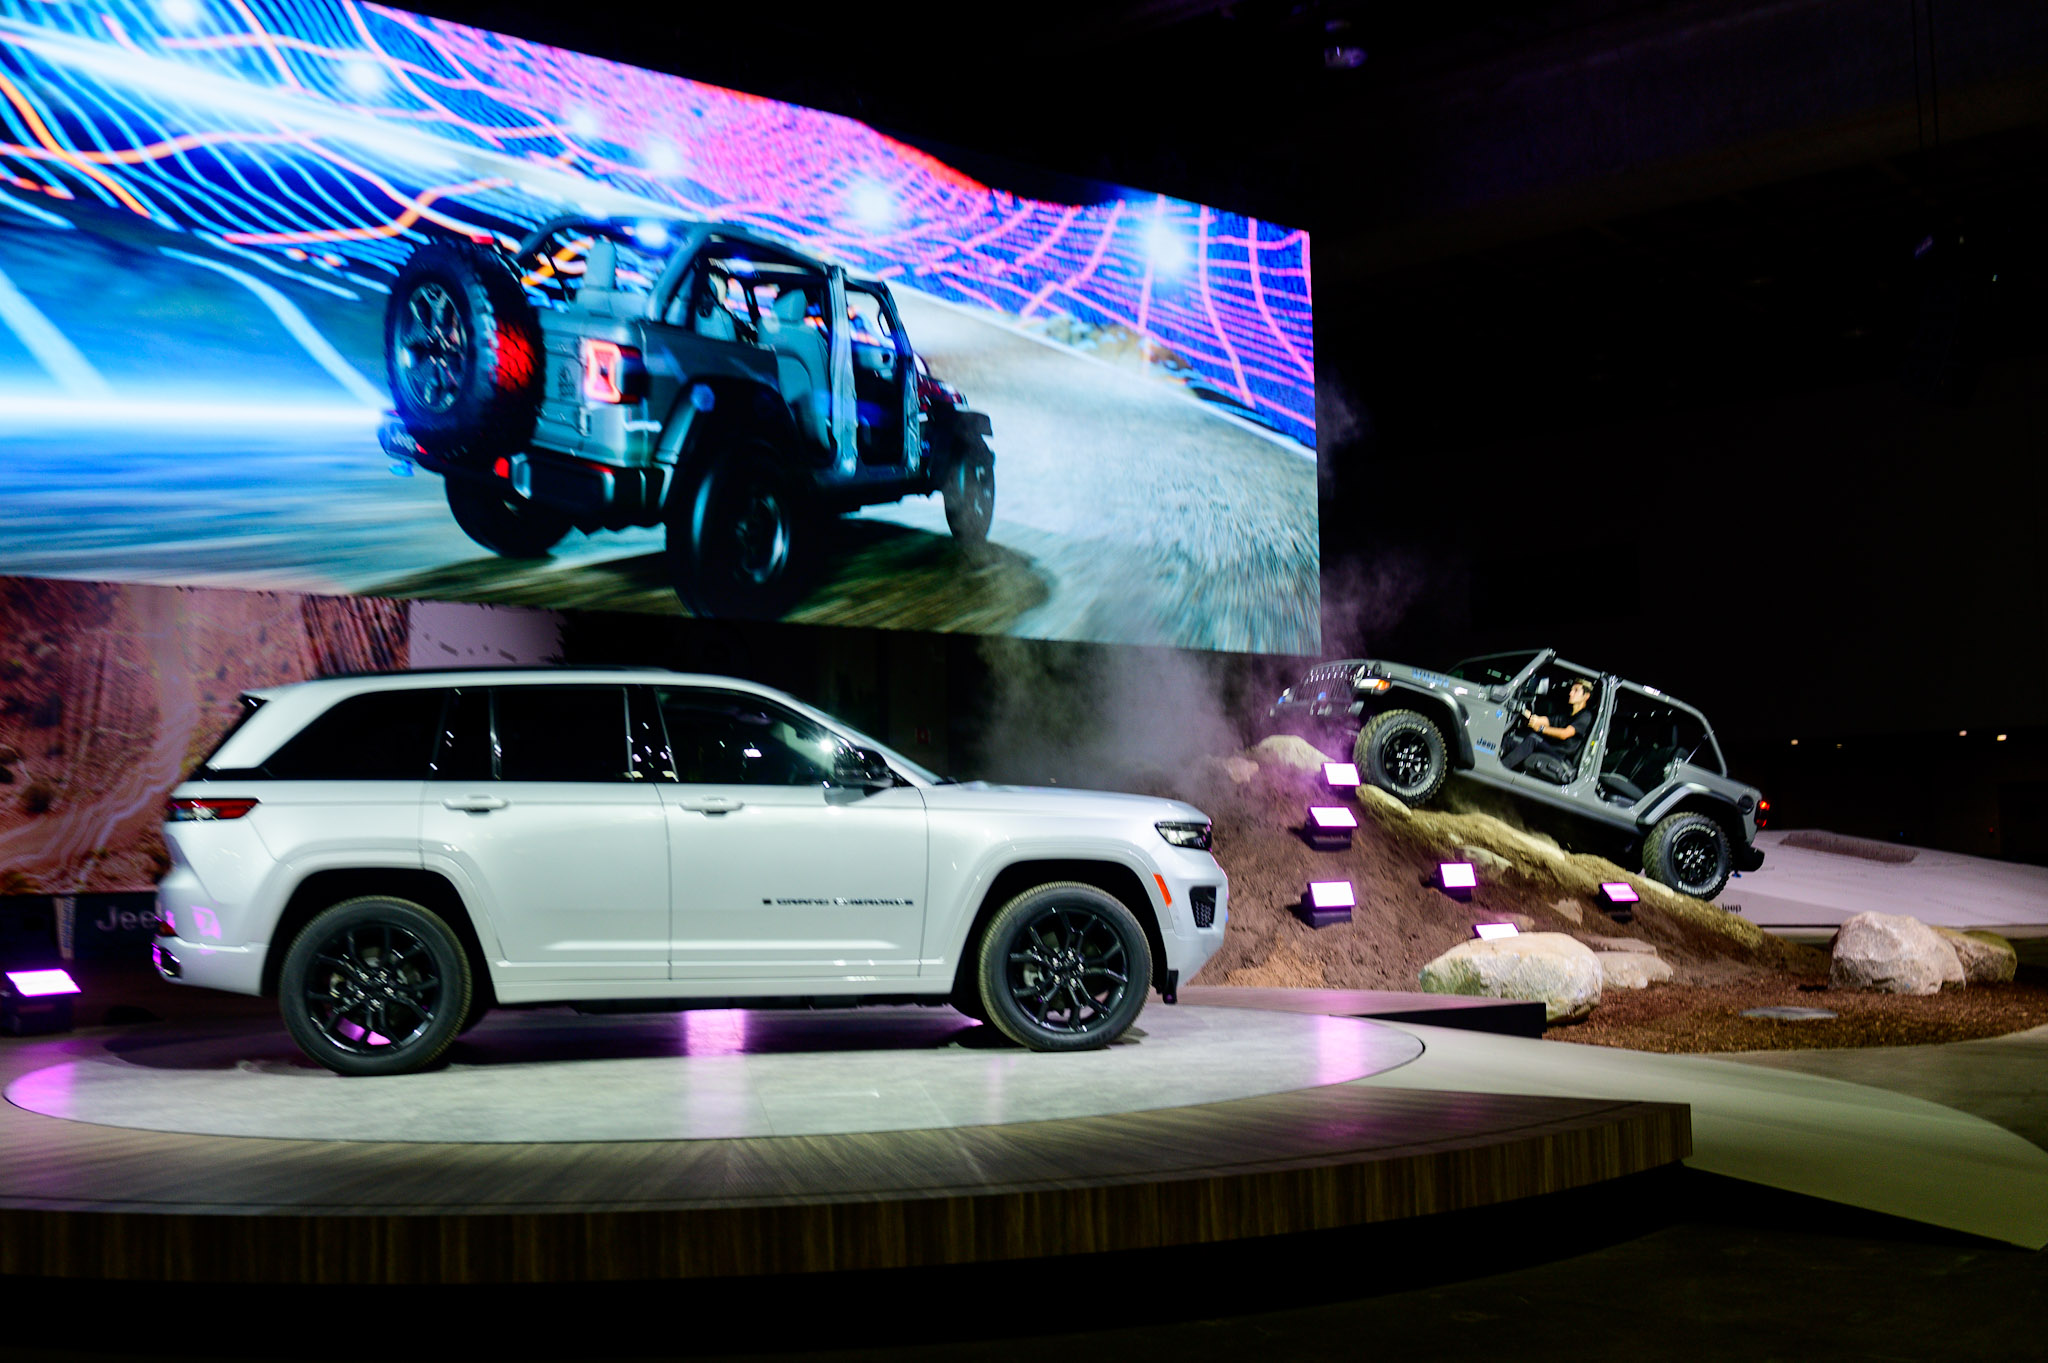 Jeep unveils the 2023 Grand Cherokee 4xe and Wrangler Willys 4xe PHEVs as the 2022 North American International Auto Show begins with media preview day at Huntington Place in Detroit on Wednesday, Sept. 14 2022.